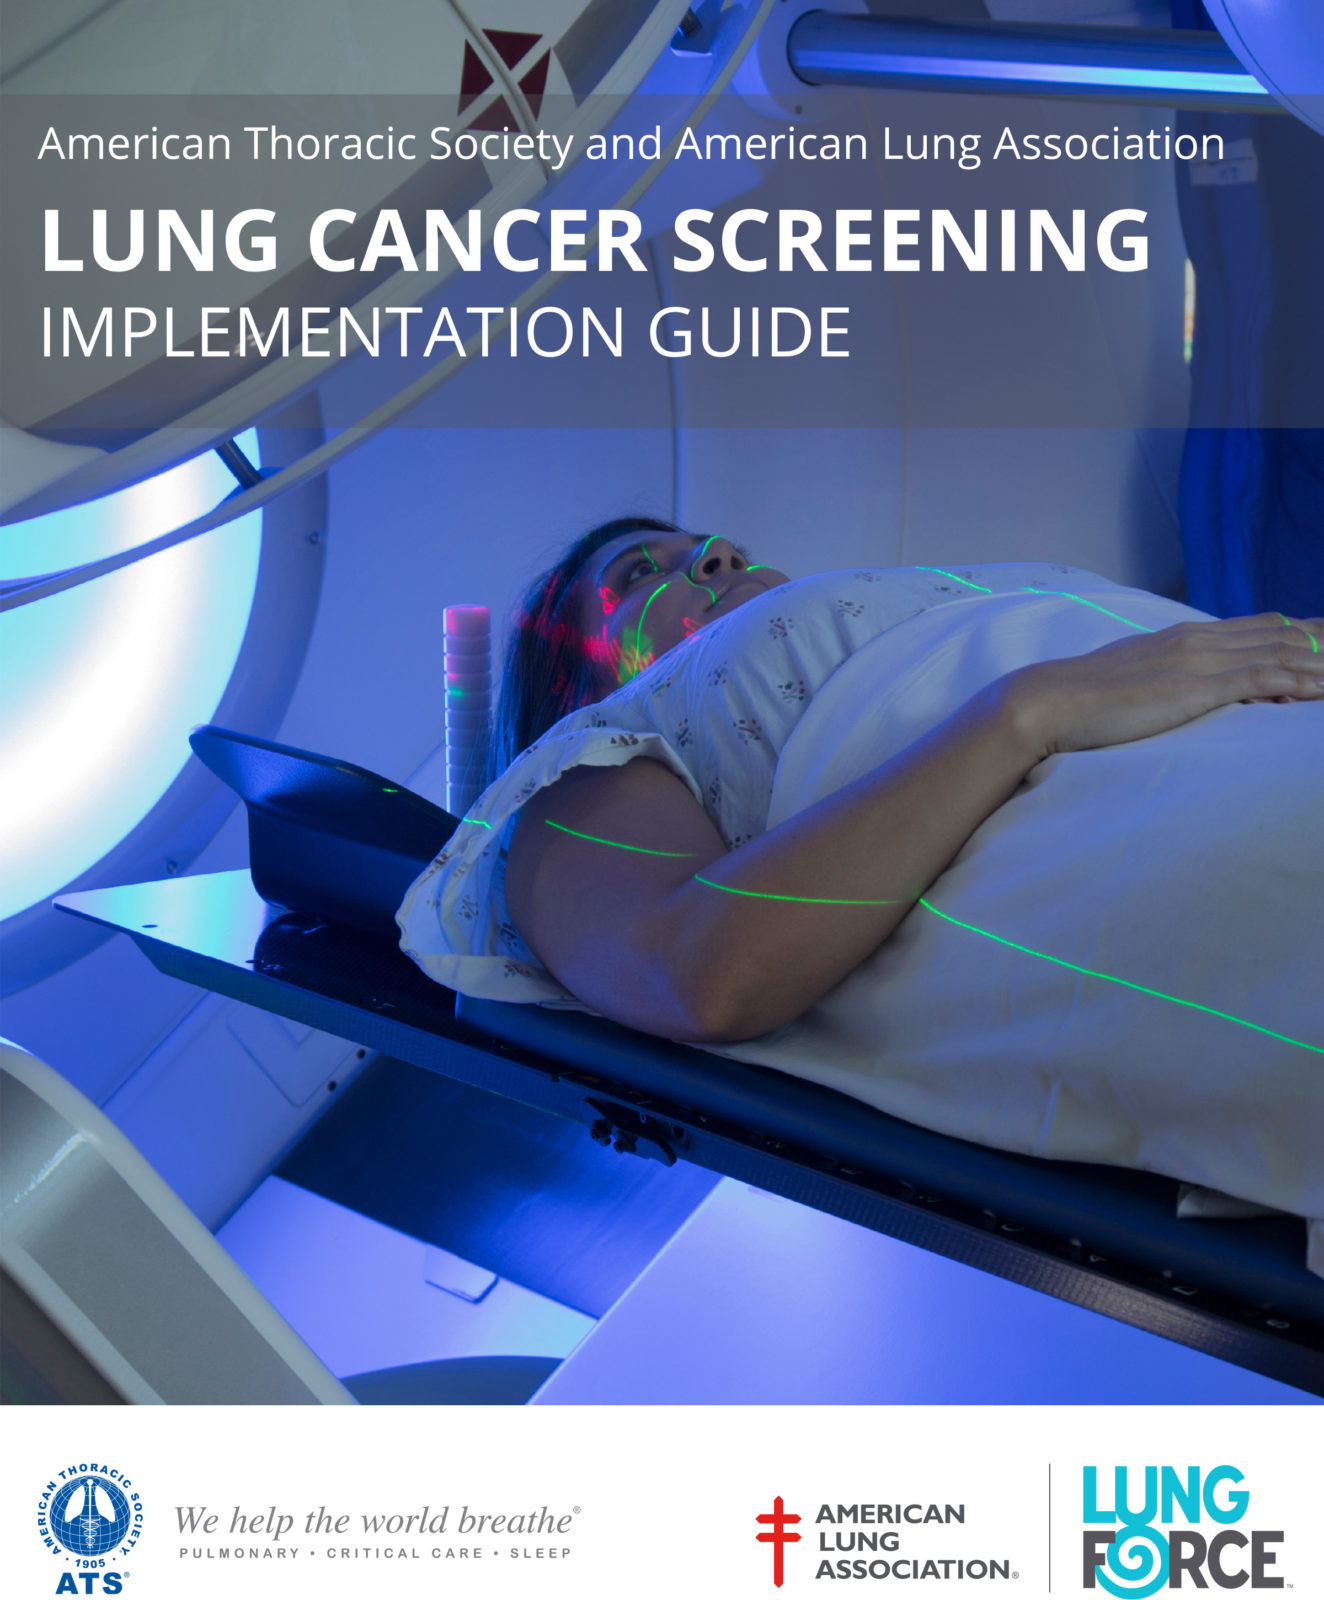 Image for American Thoracic Society & American Lung Association Implementation Guide for Lung Cancer Screening